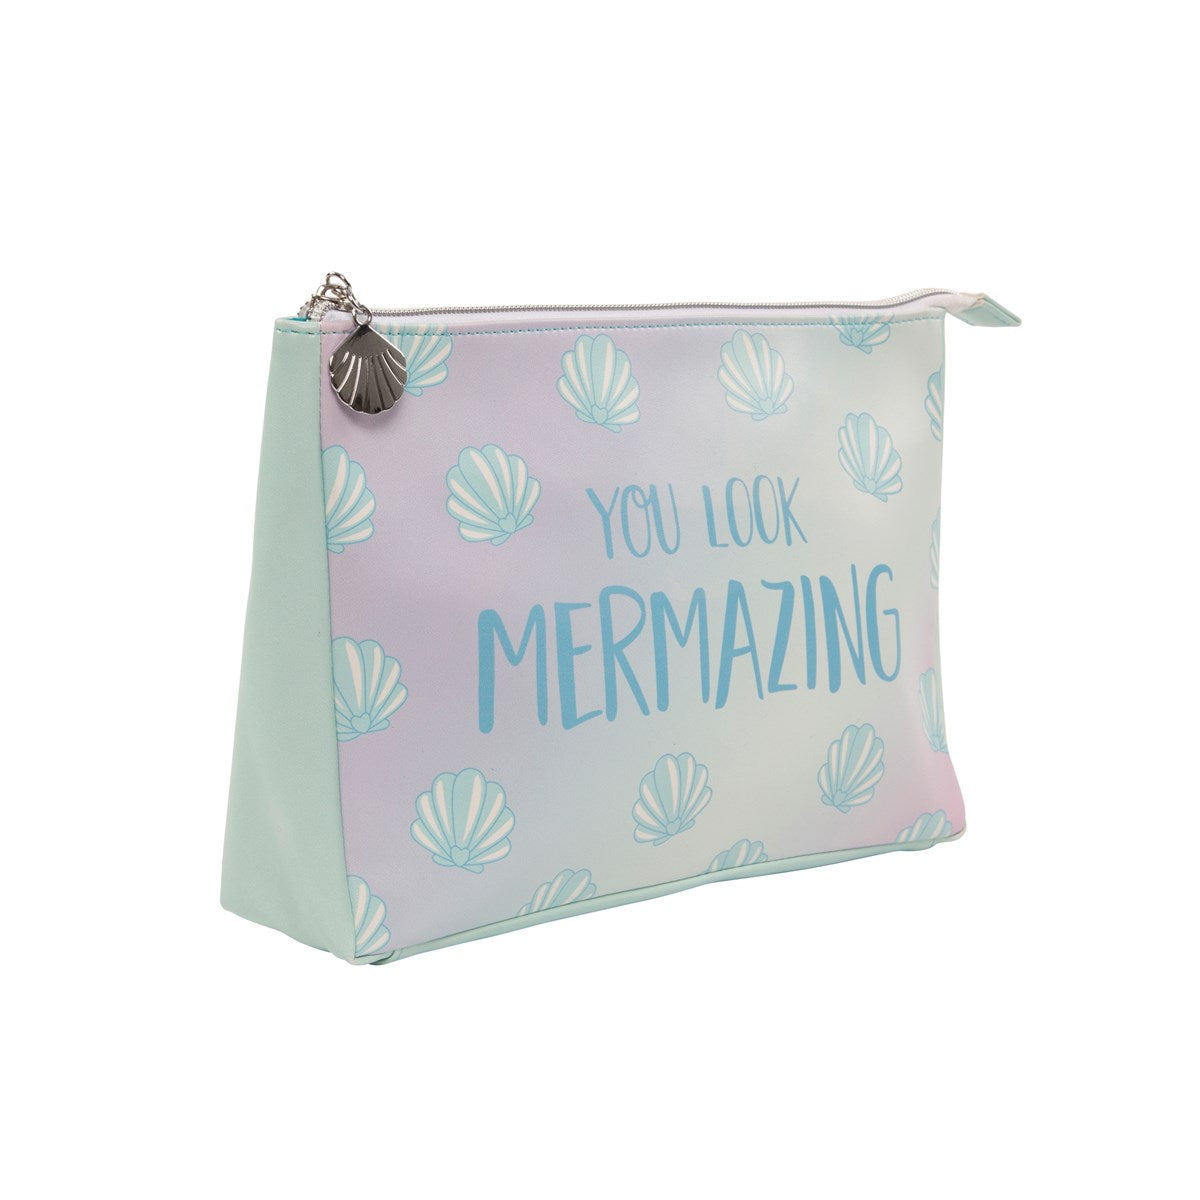 Large make up / wash bag featuring shell print and a mermaid slogan: You Look Mermazing